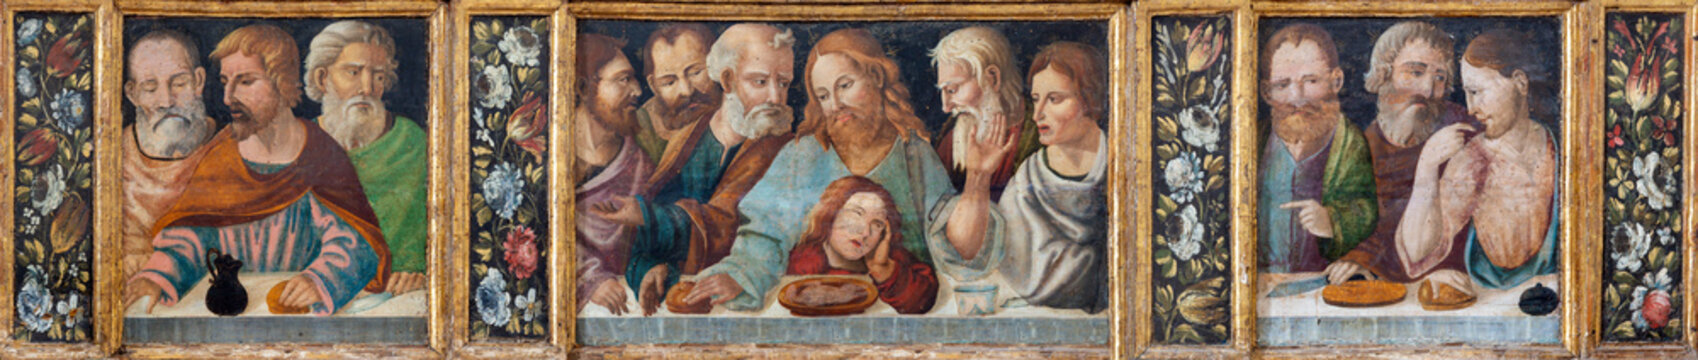 MATERA, ITALY - MARCH 8, 2022: The renaissance painting of Last Supper in the church Chiesa di San Pietro Caveoso by unknown artist from Matera (1540).